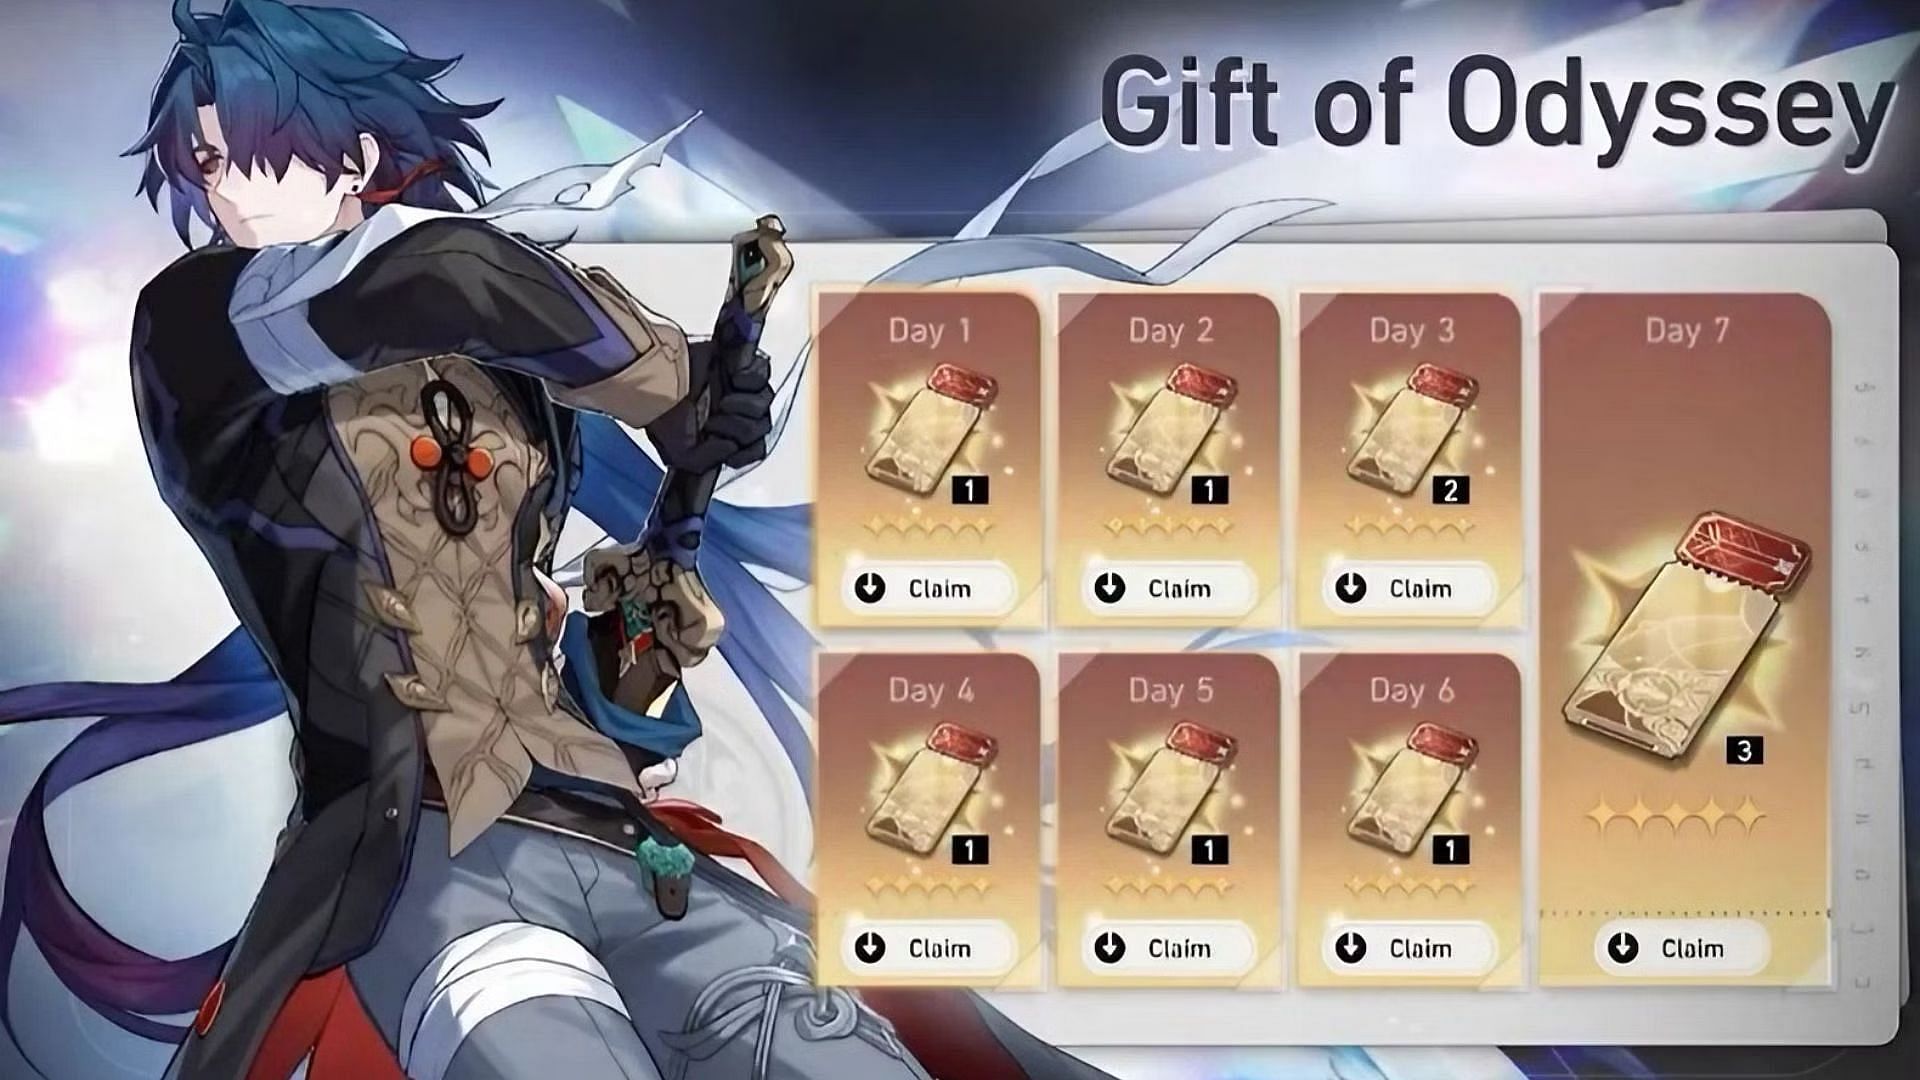 Gift of Odessey check-in event (Image via HoYoverse)